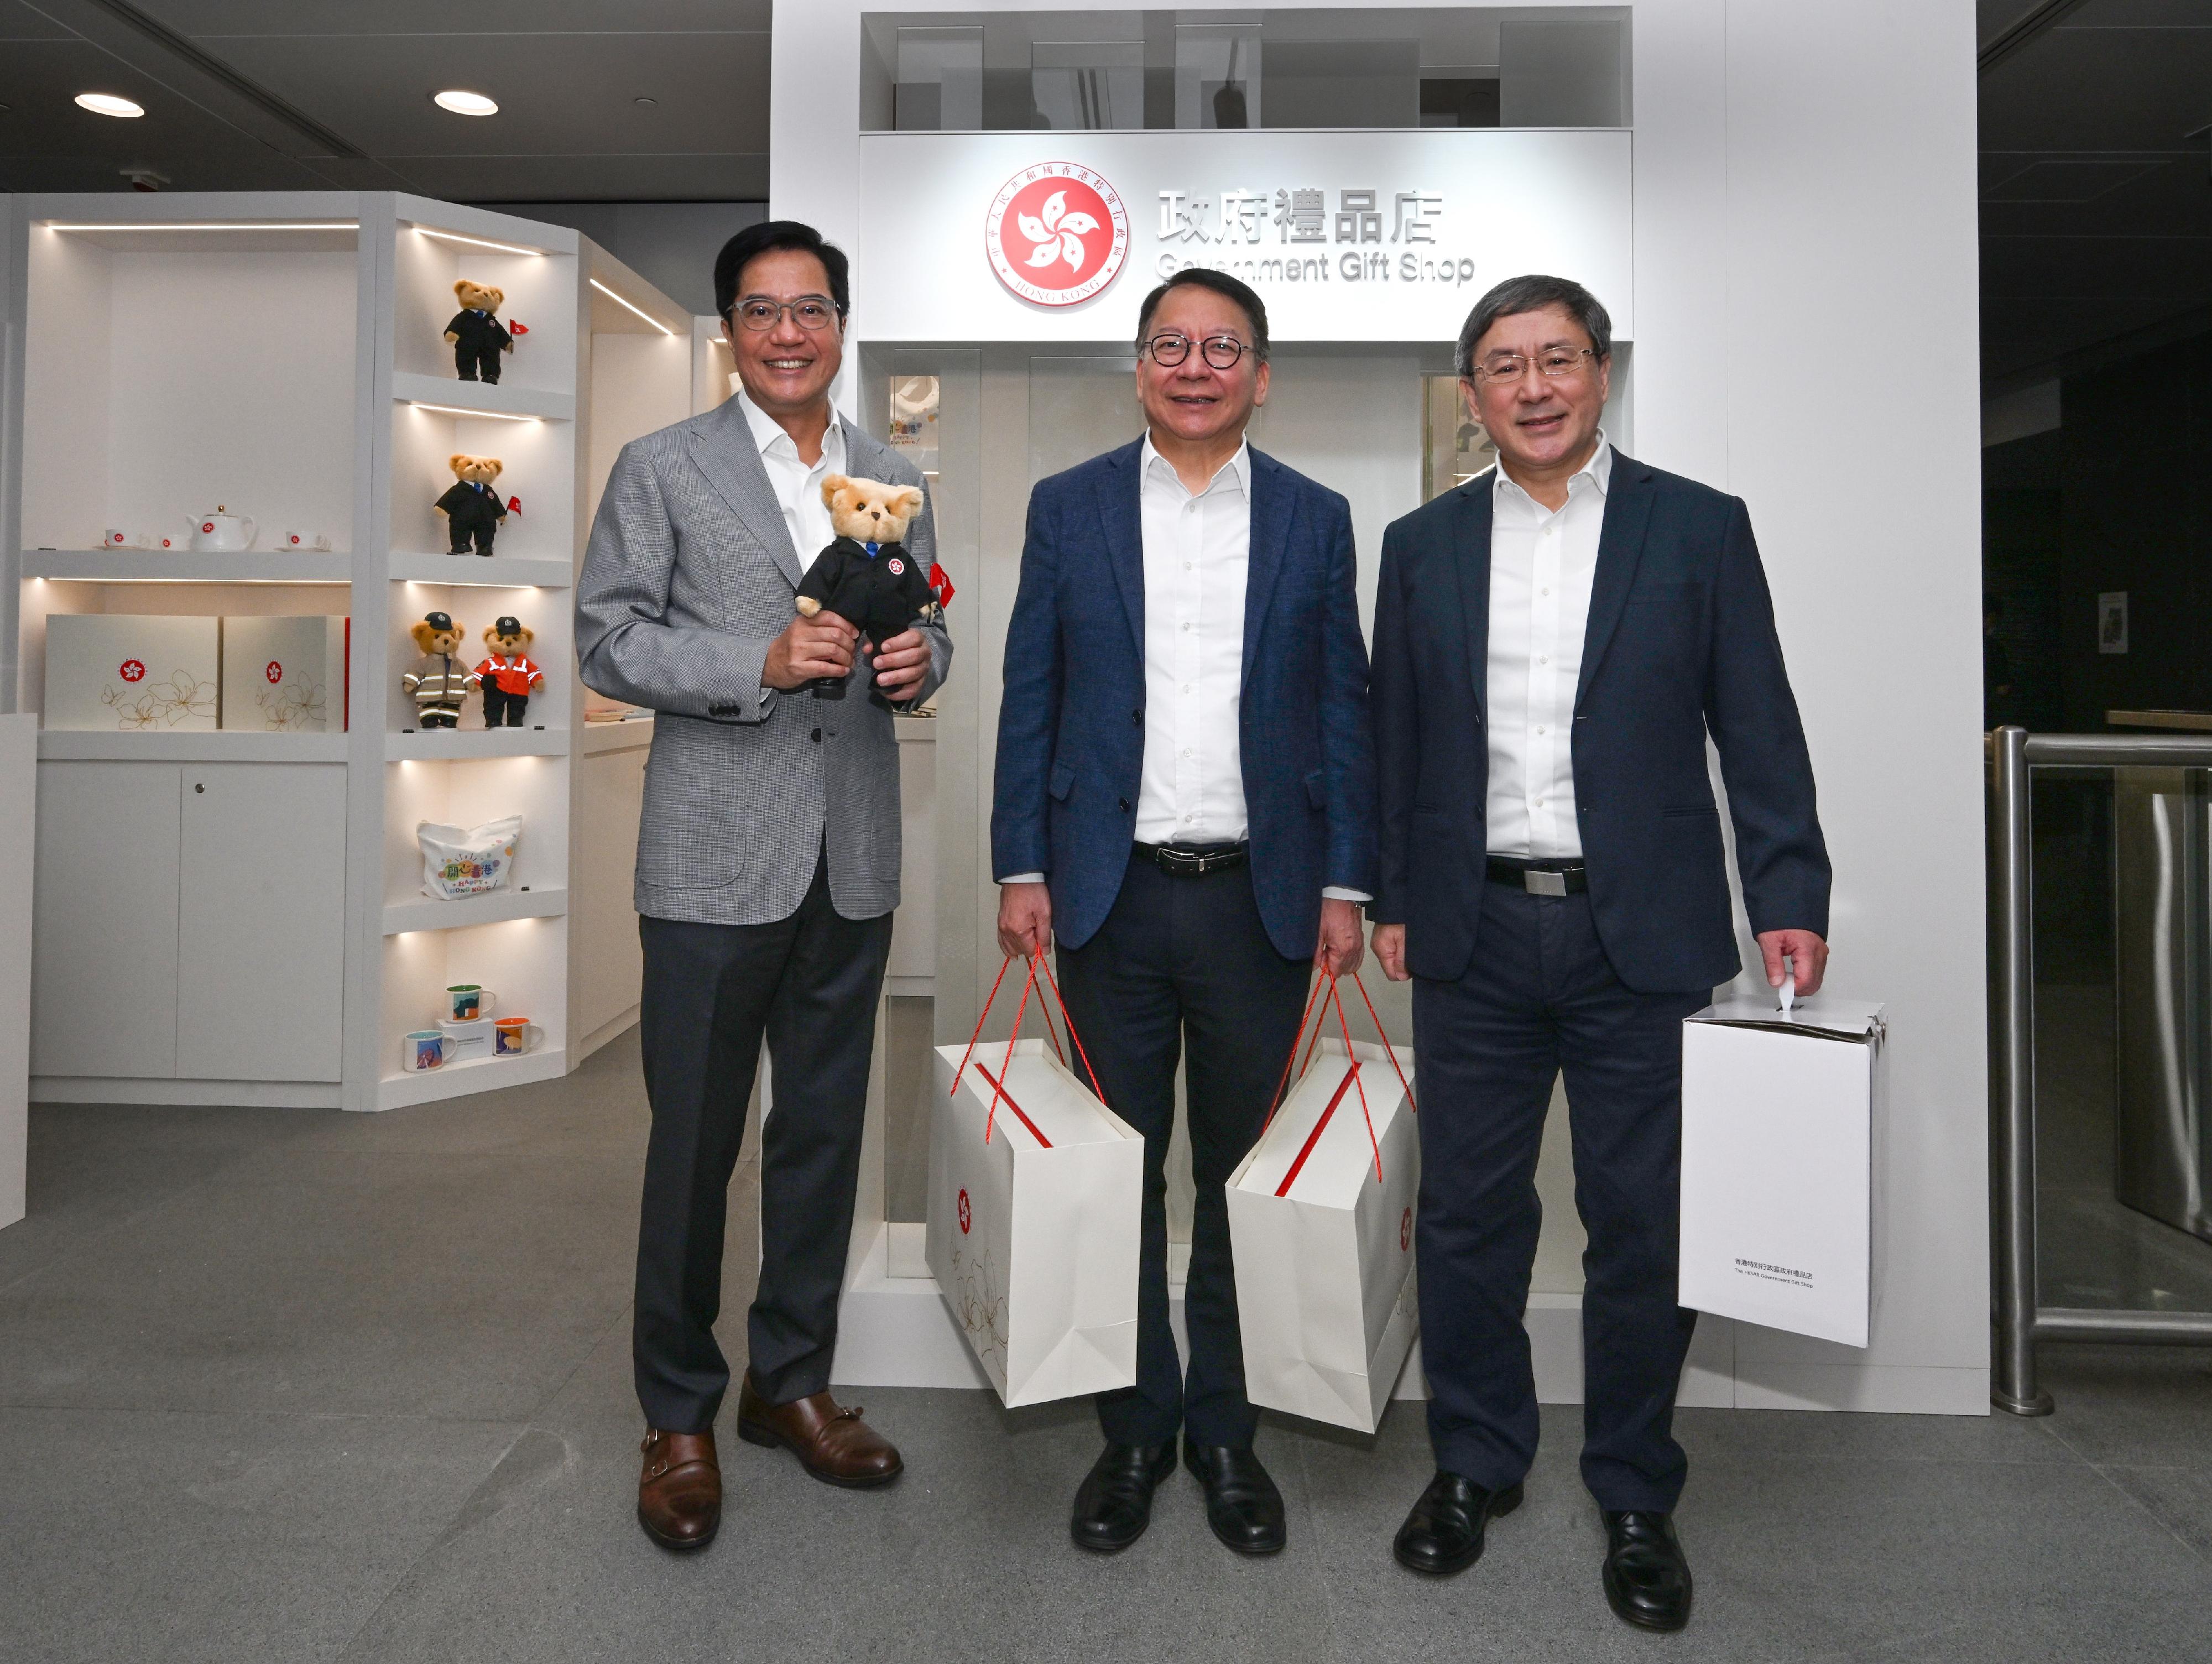 The Acting Chief Executive, Mr Chan Kwok-ki (middle); the Acting Financial Secretary, Mr Michael Wong (left); and the Deputy Chief Secretary for Administration, Mr Cheuk Wing-hing (right), purchase souvenirs at the Government Gift Shop today (July 7). 